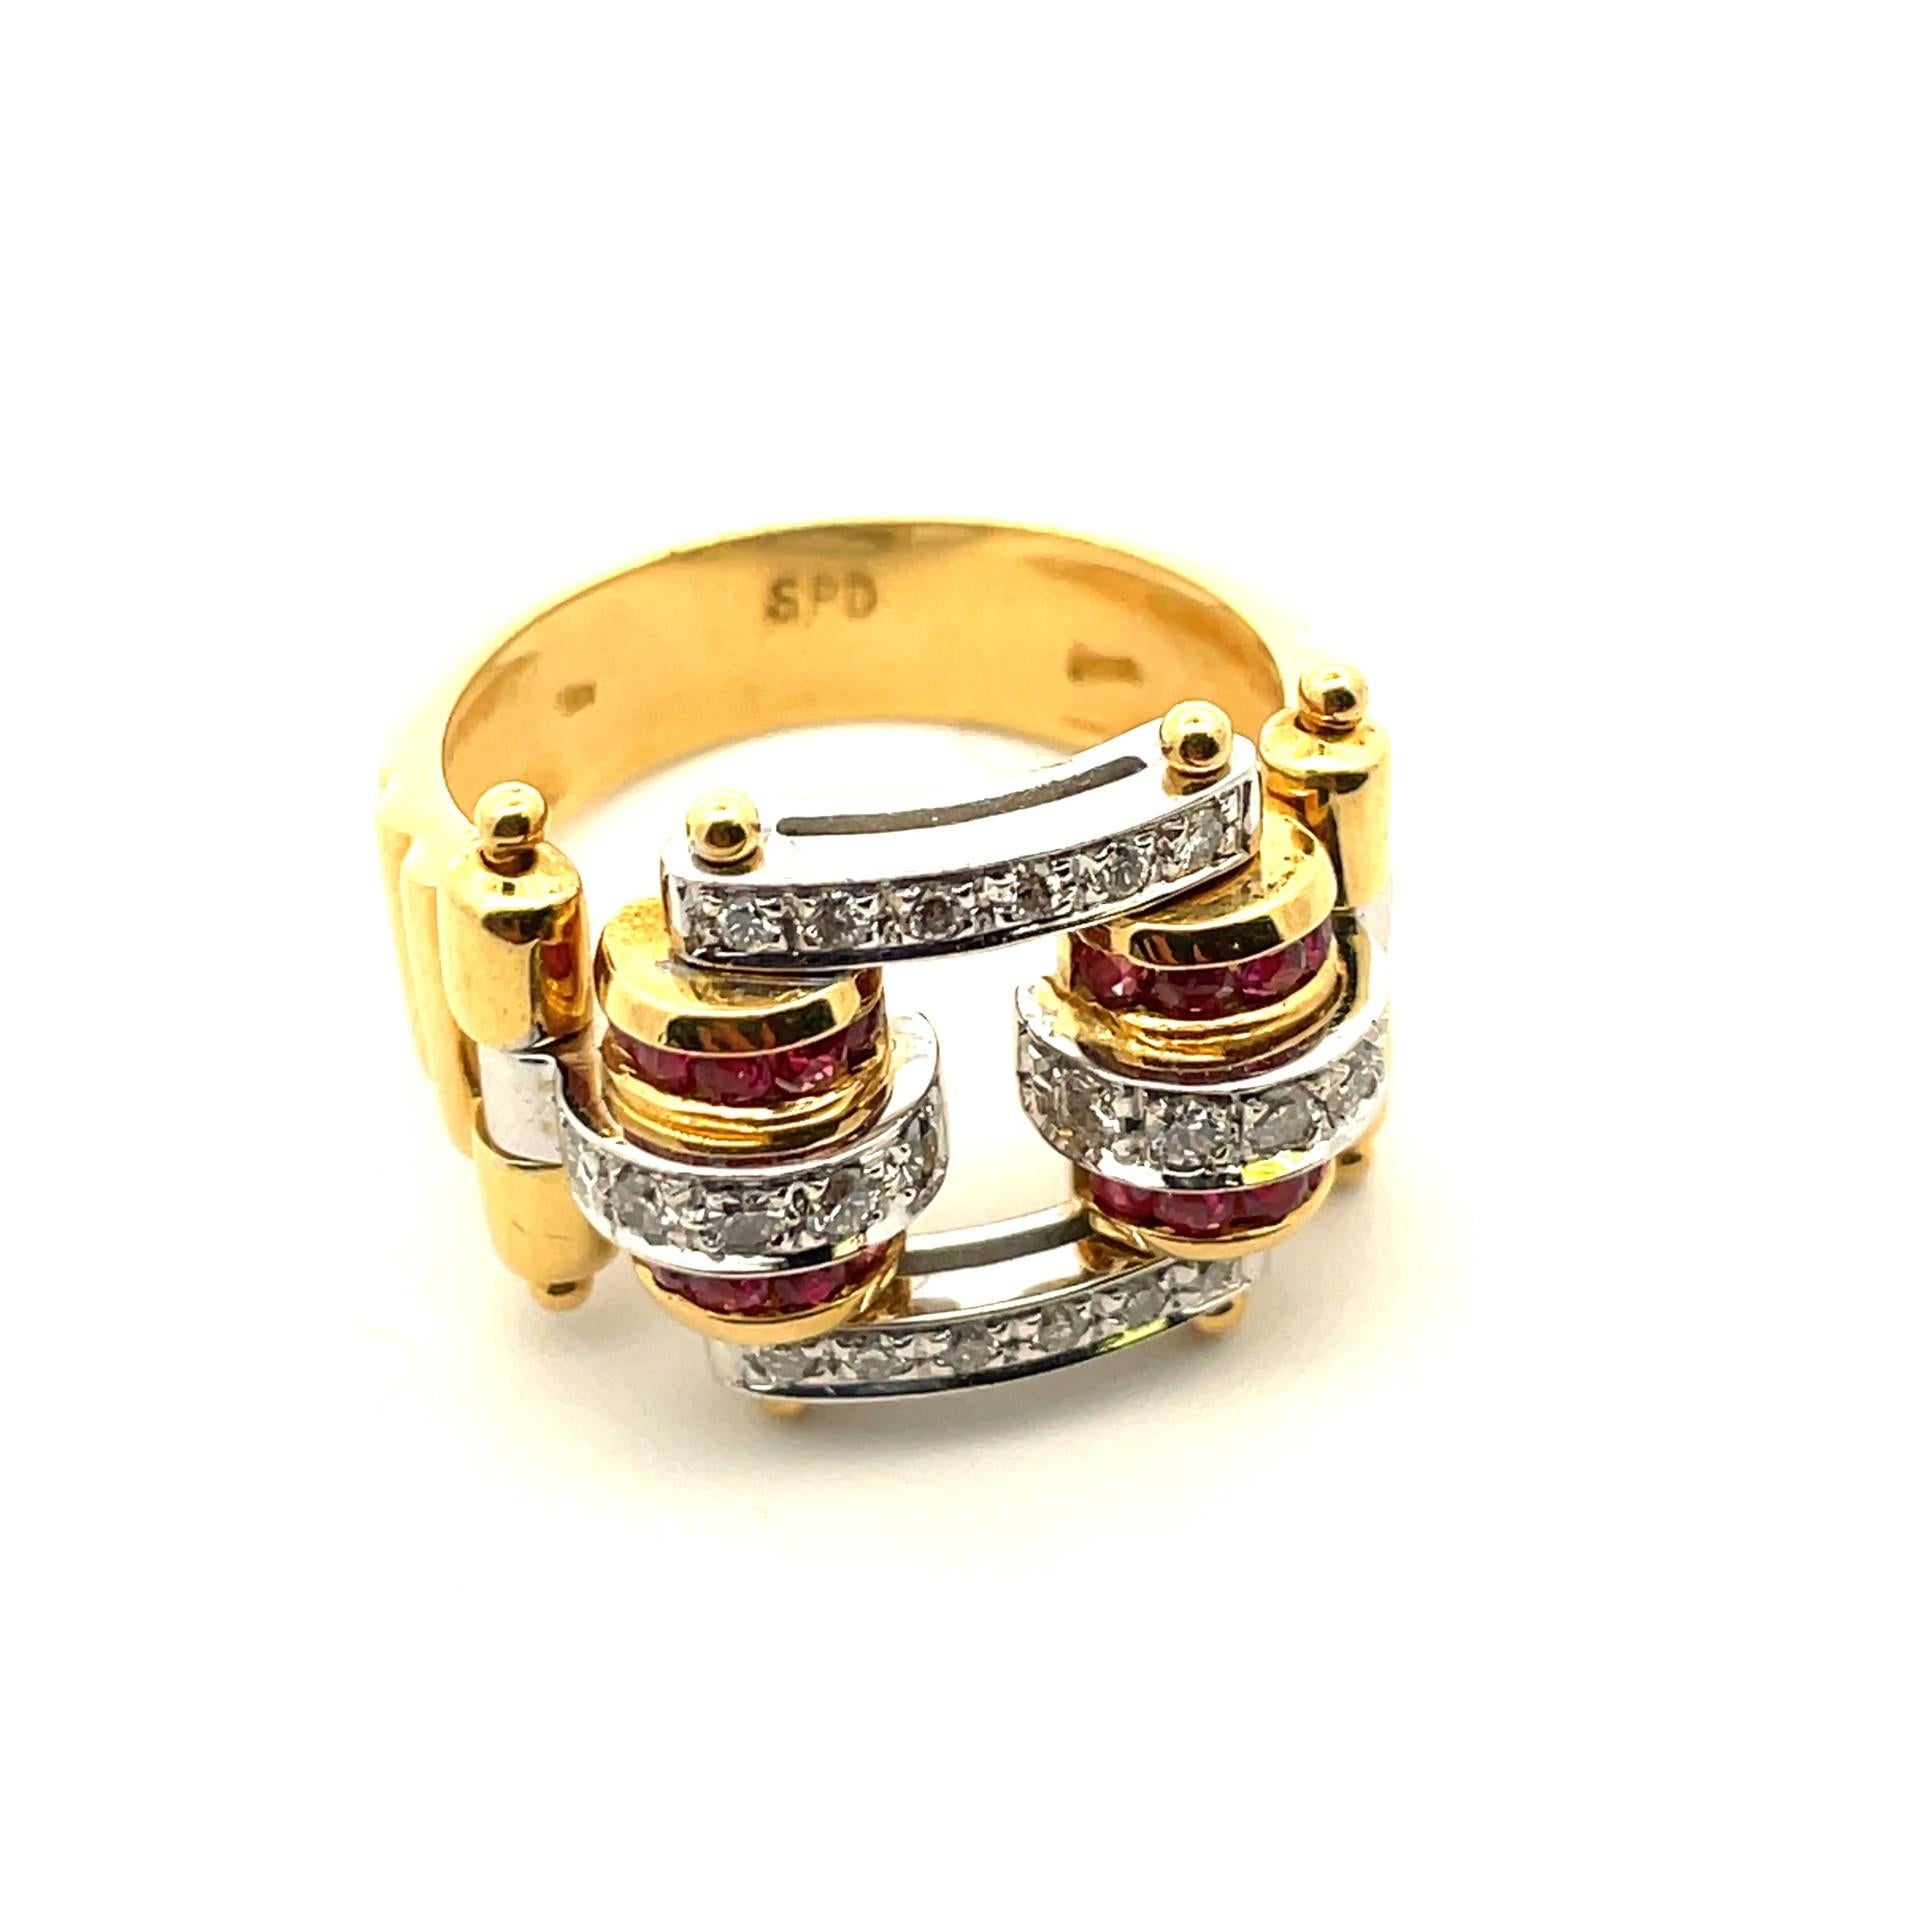 One natural red ruby and natural brilliant cut white diamond double scroll ring in 18 kt yellow gold. If you're looking for something with a cool and uncommon design look no further.

20 natural red ruby 0.60ct total weight

22 brilliant cut natural